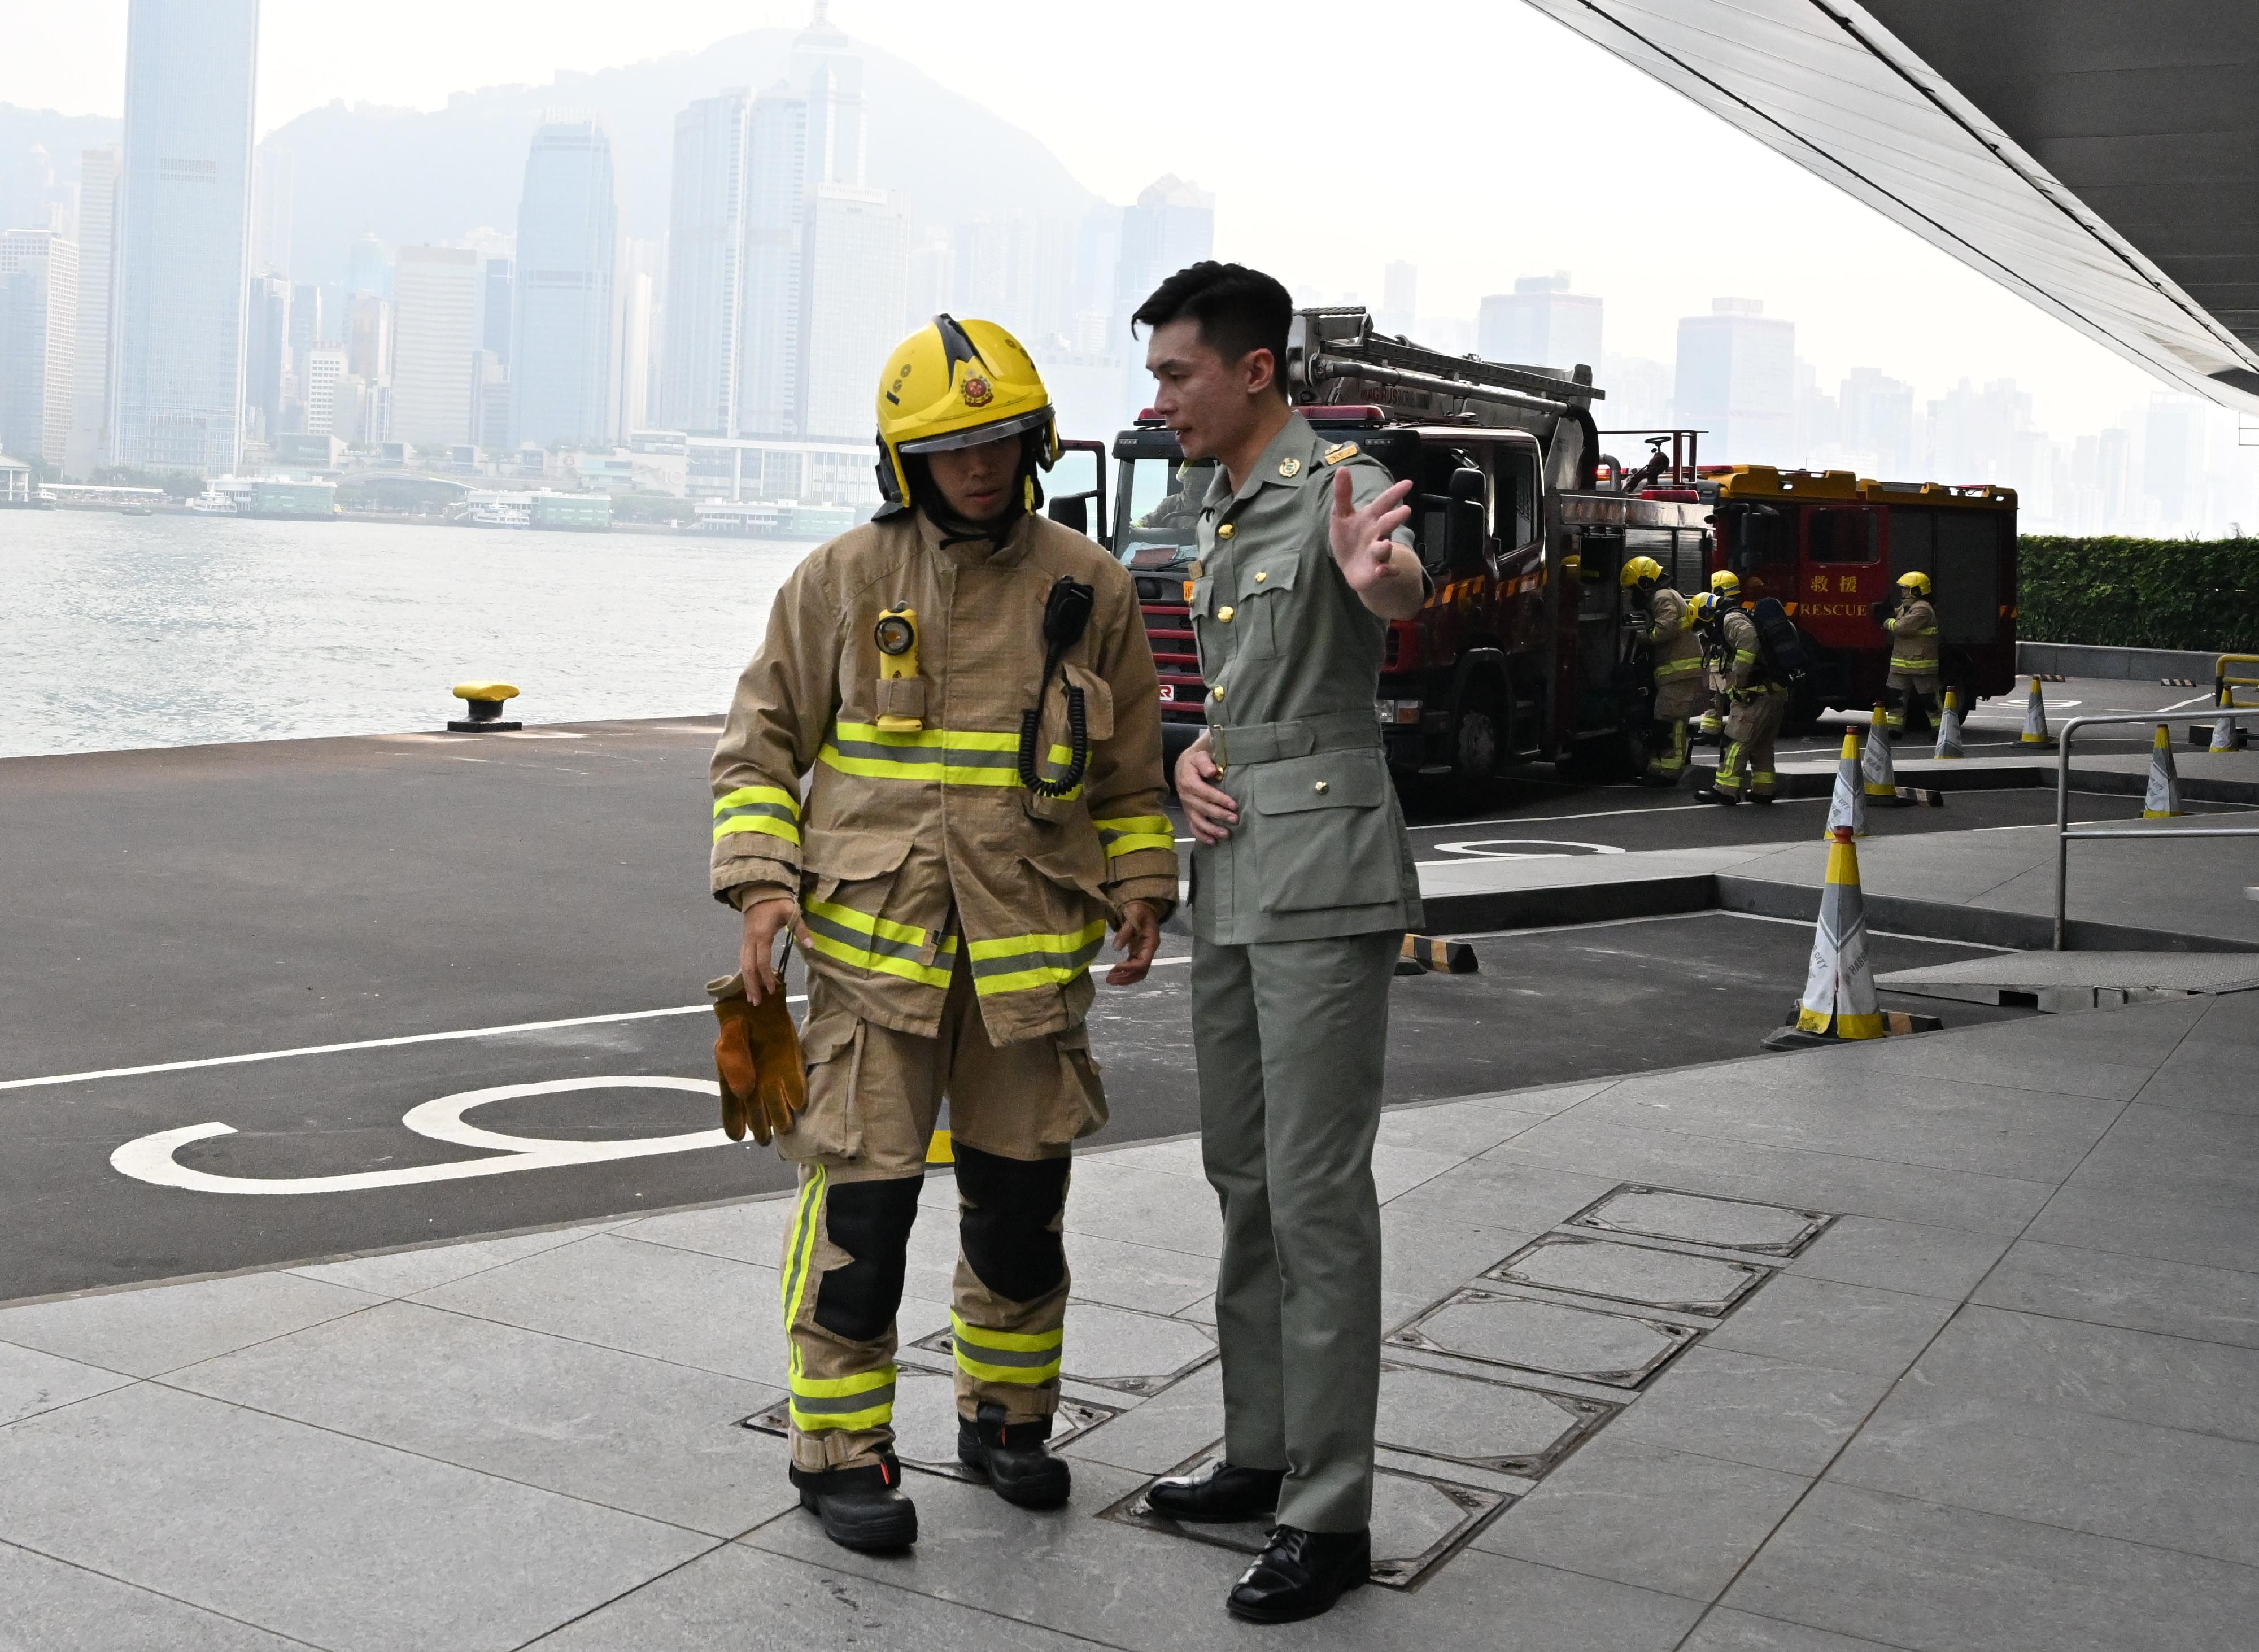 Hong Kong Customs and the Fire Services Department (FSD) co-organised a counter-terrorism exercise codenamed "GATEKEEPER II" this afternoon (May 30) at the Ocean Terminal. Photo shows a Customs officer briefing an FSD officer who responded swiftly upon being summoned on the incident.
